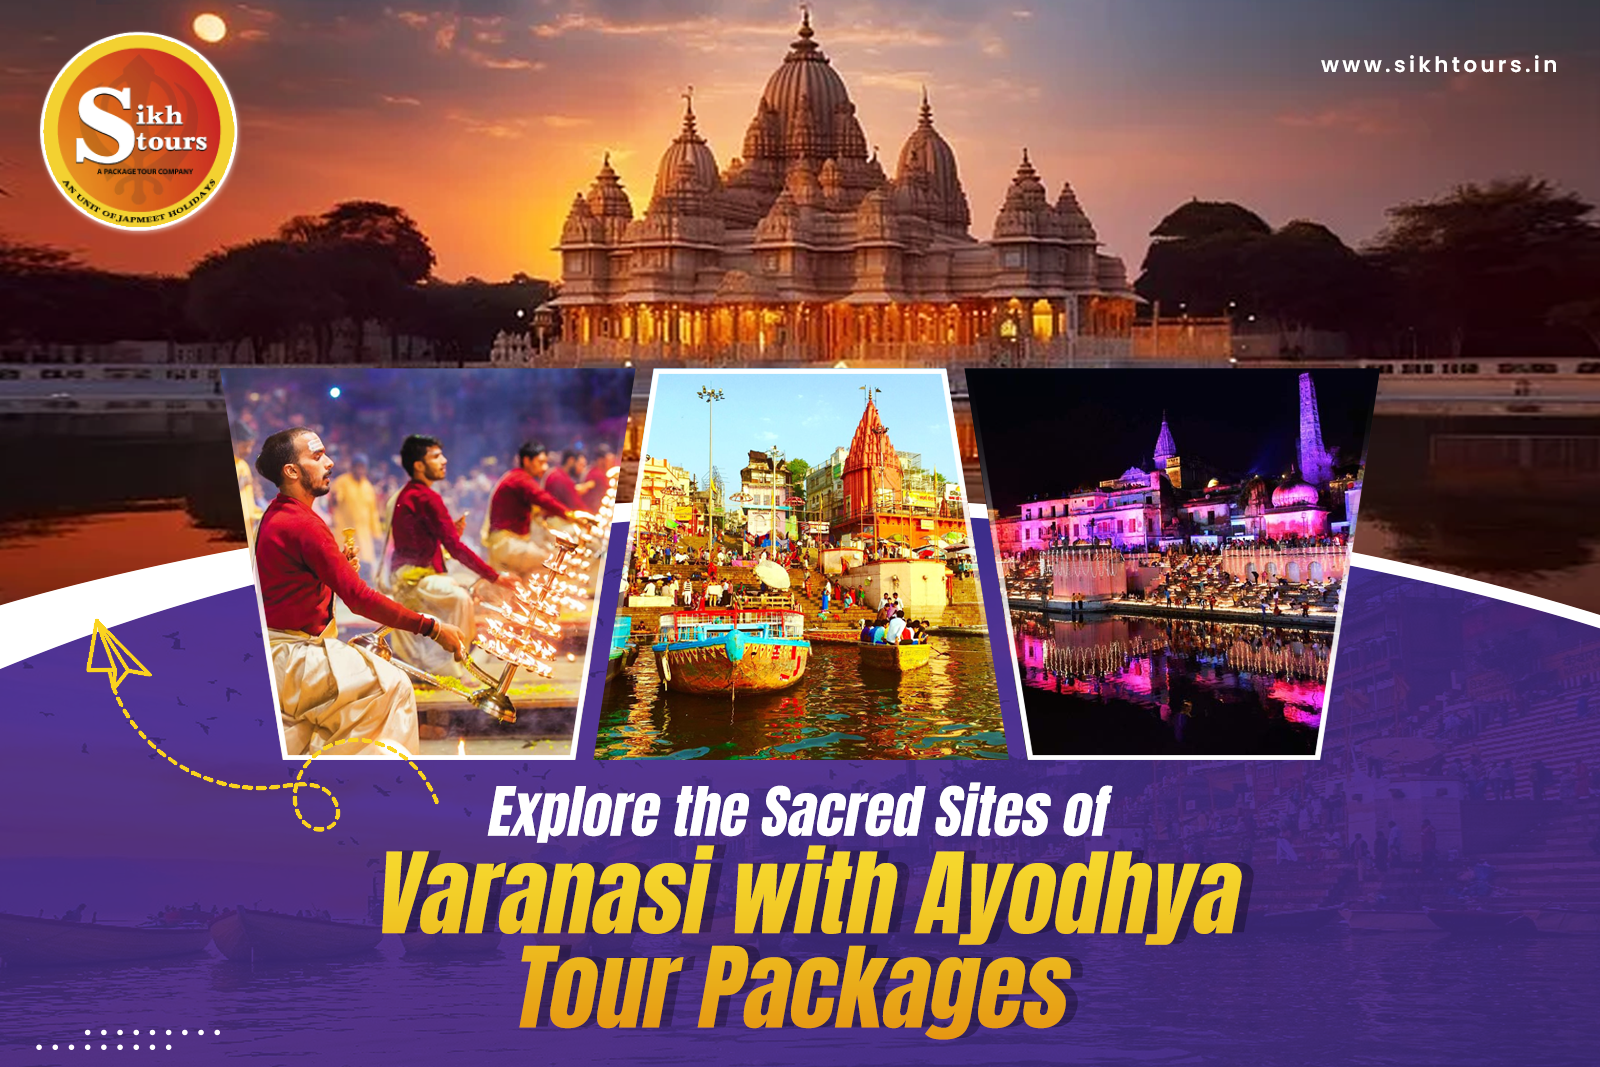 Explore the Sacred Sites of Varanasi with Ayodhya Tour Packages